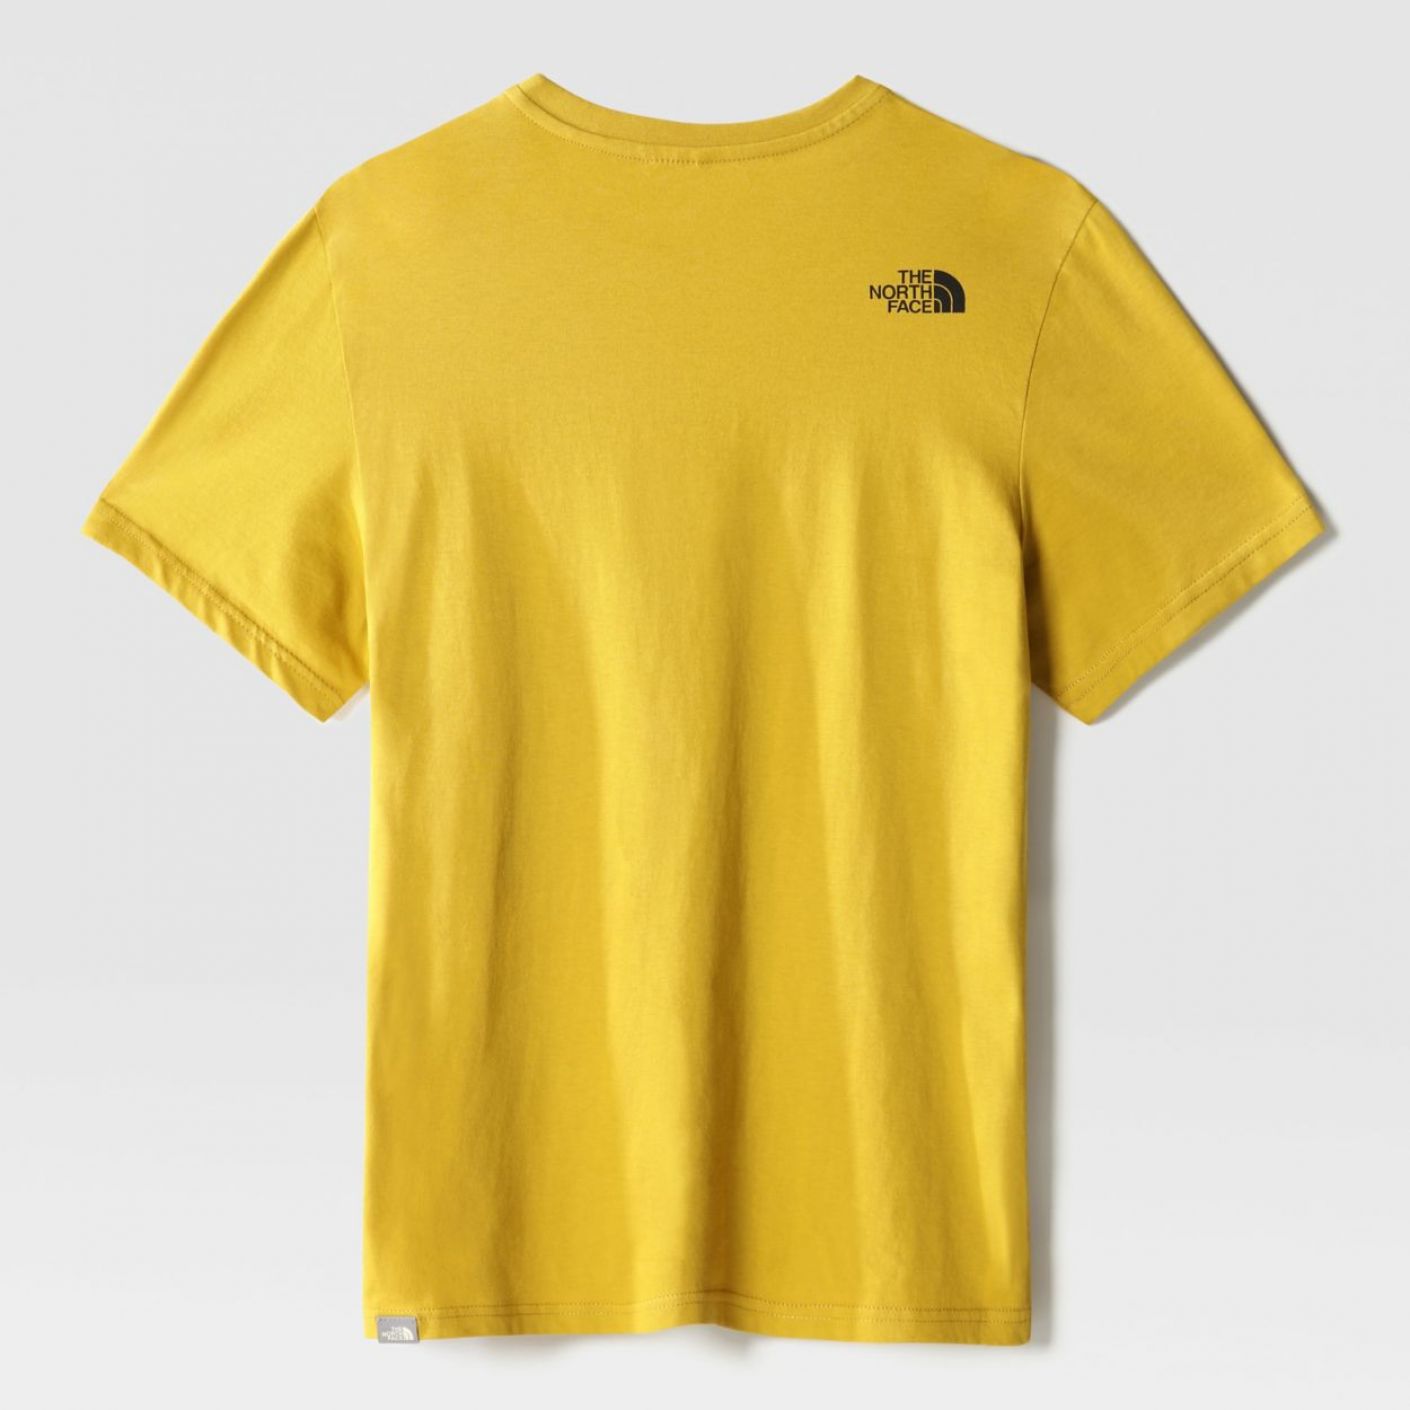 The North Face M s/s simple dome tee - eu mineral gold